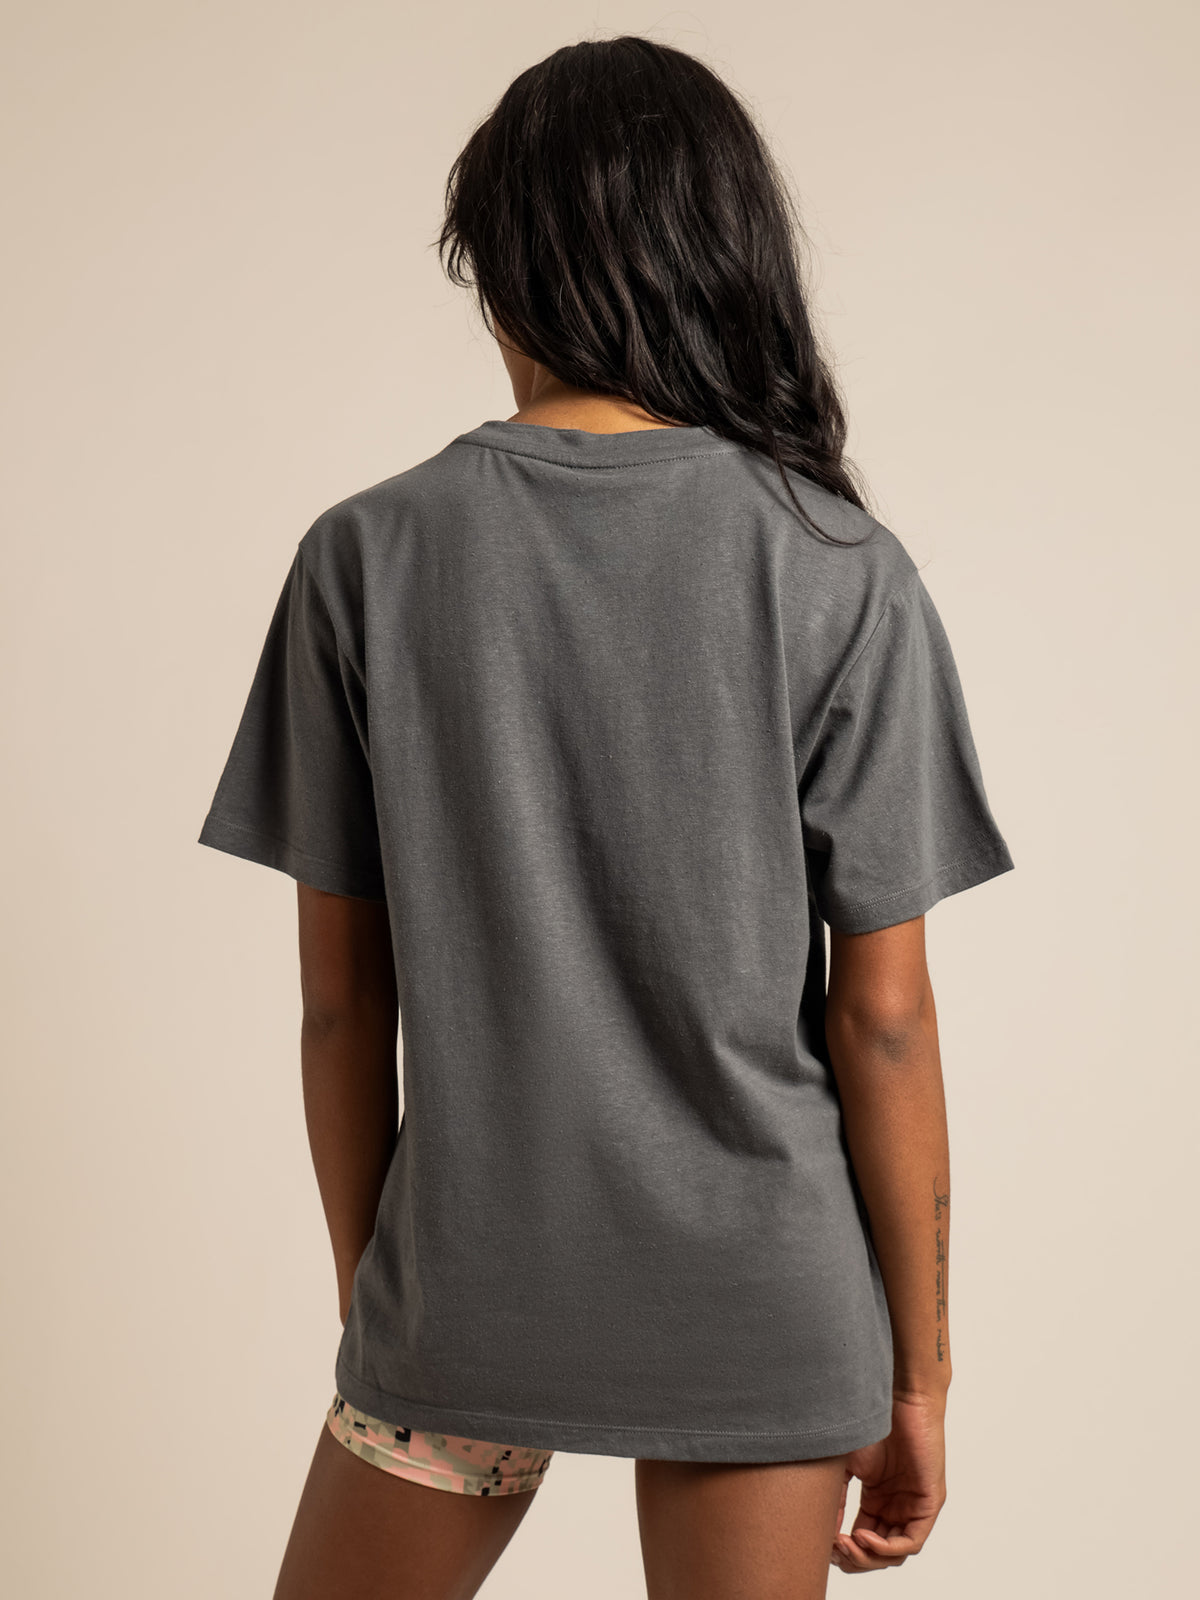 Combat T-Shirt in Charcoal